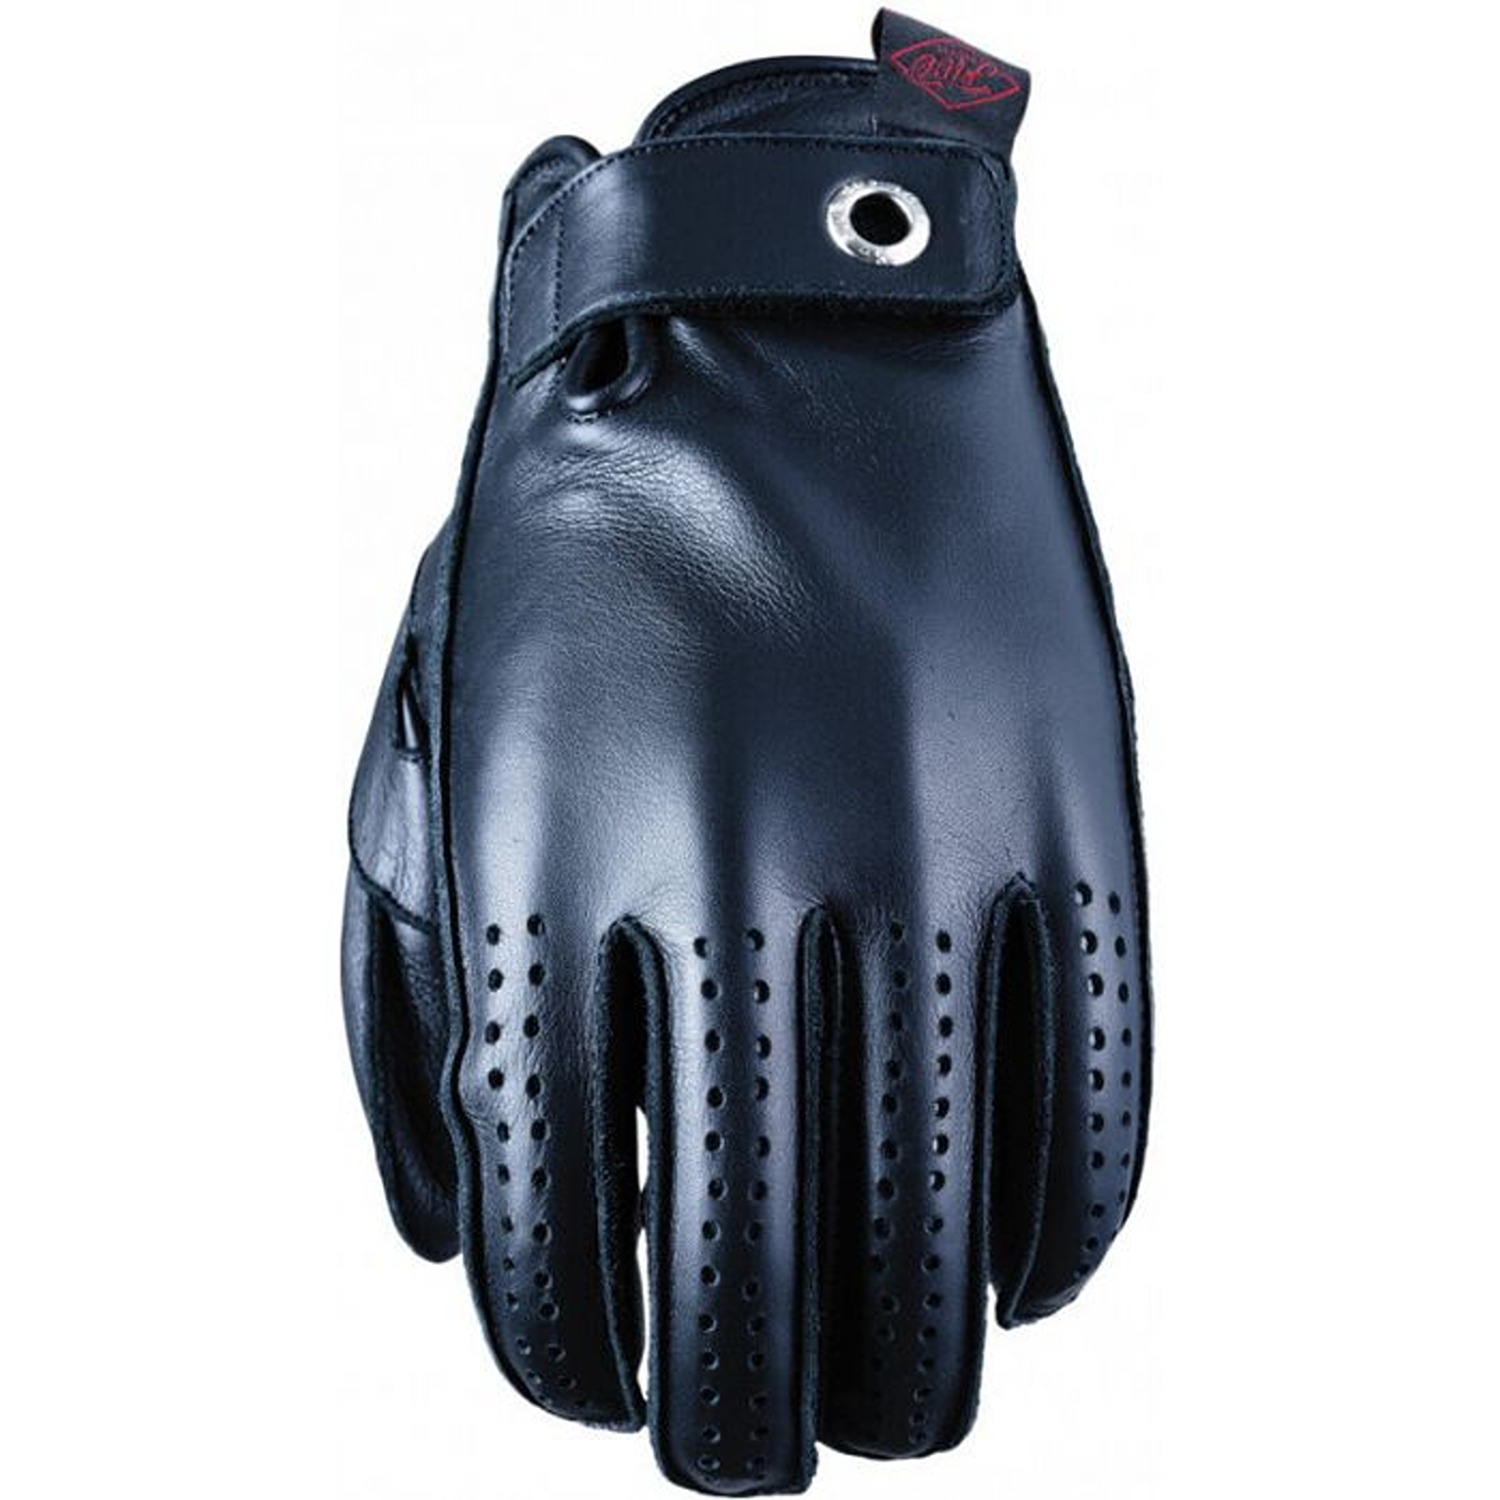 Image of Five Colorado Gloves Black Size XL ID 4770916487306